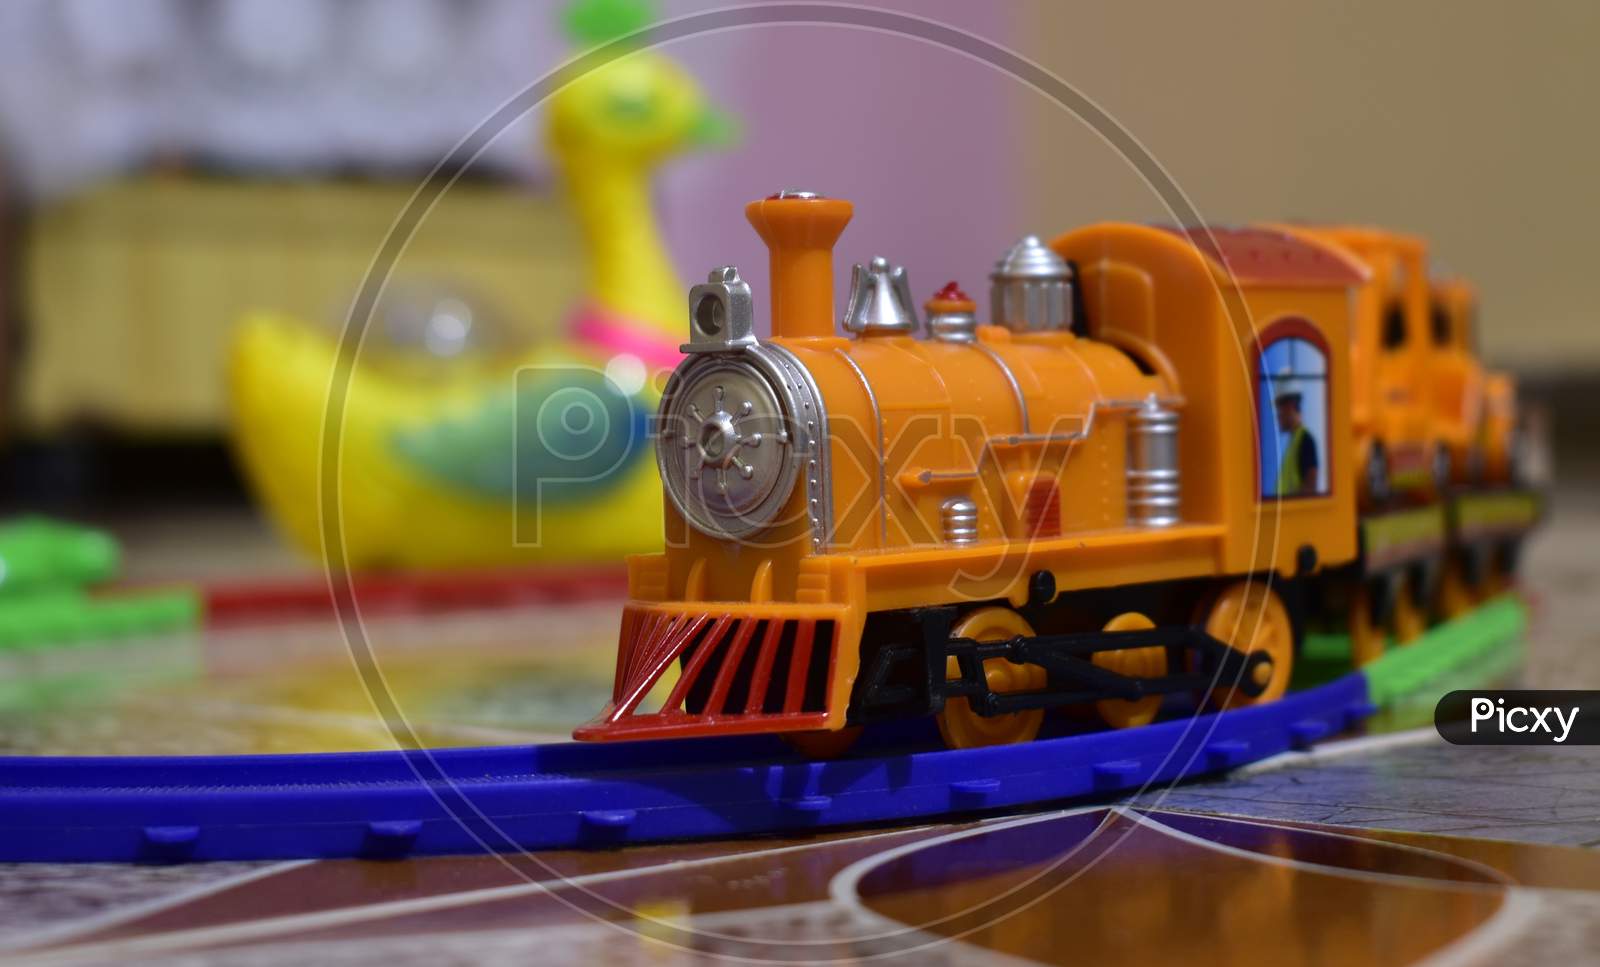 Toys plastic train for children playing